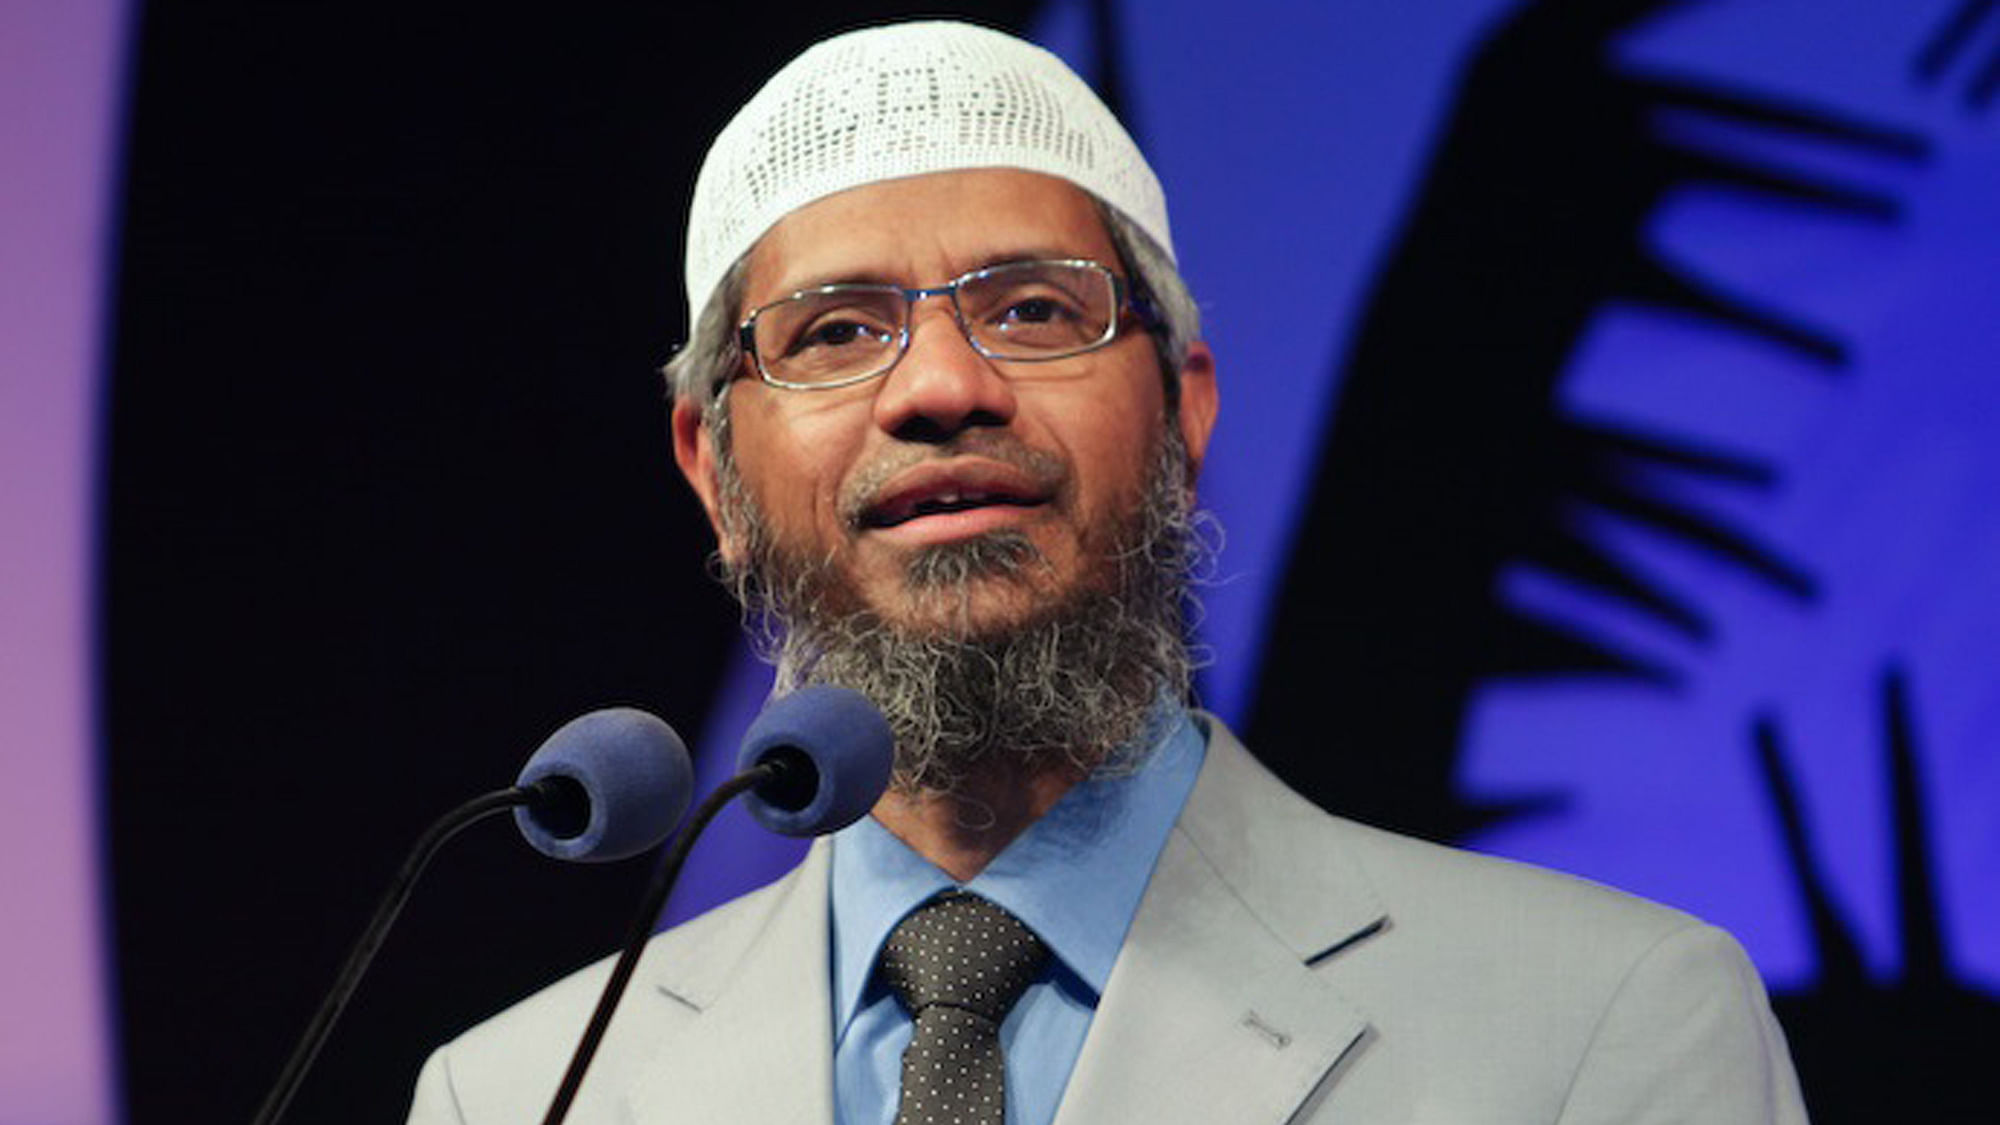 Zakir Naik has been under fire ever since it was revealed that one of the Dhaka attackers was his follower.&nbsp;